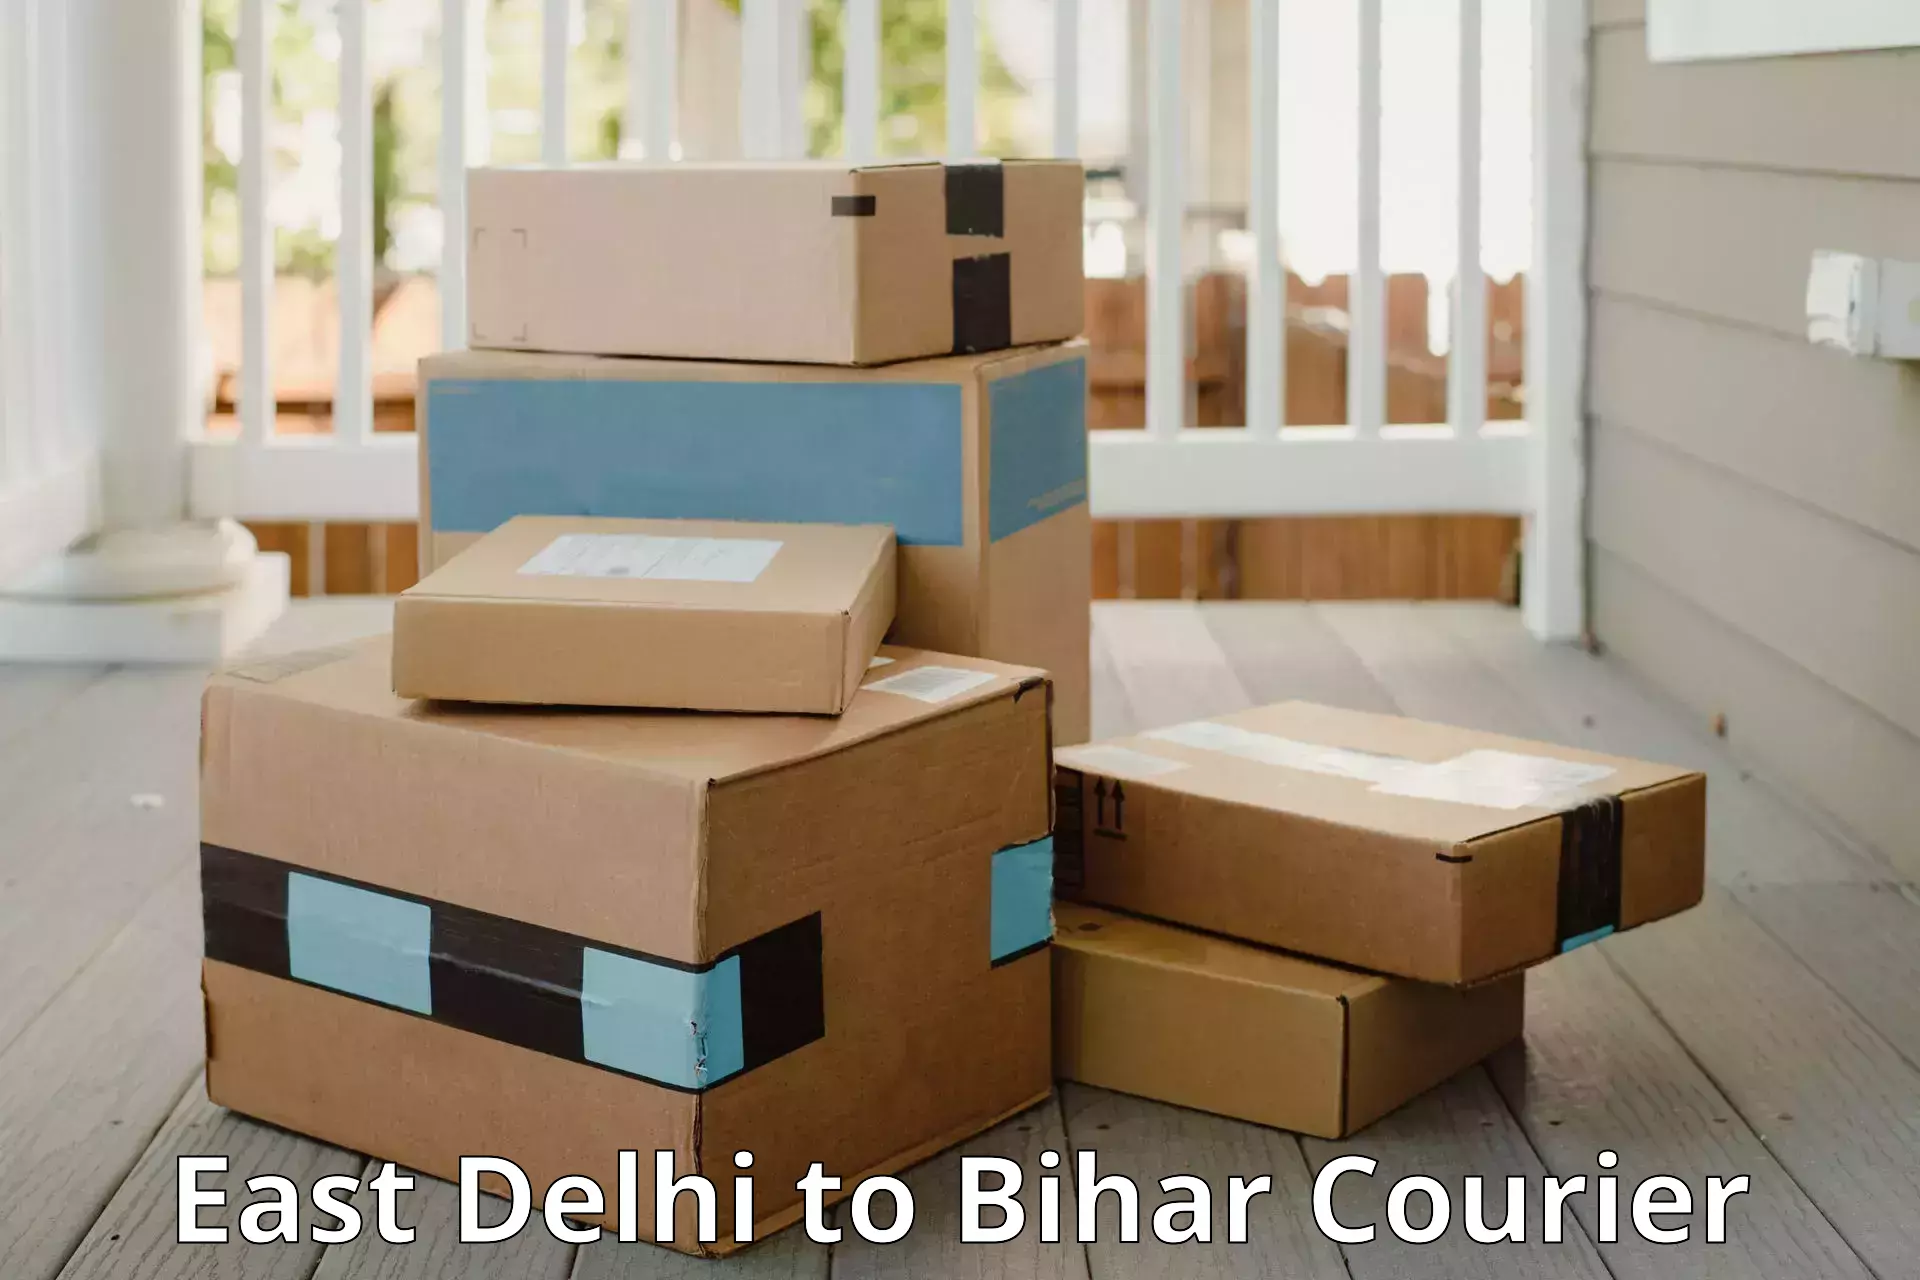 Luggage storage and delivery East Delhi to Bihar